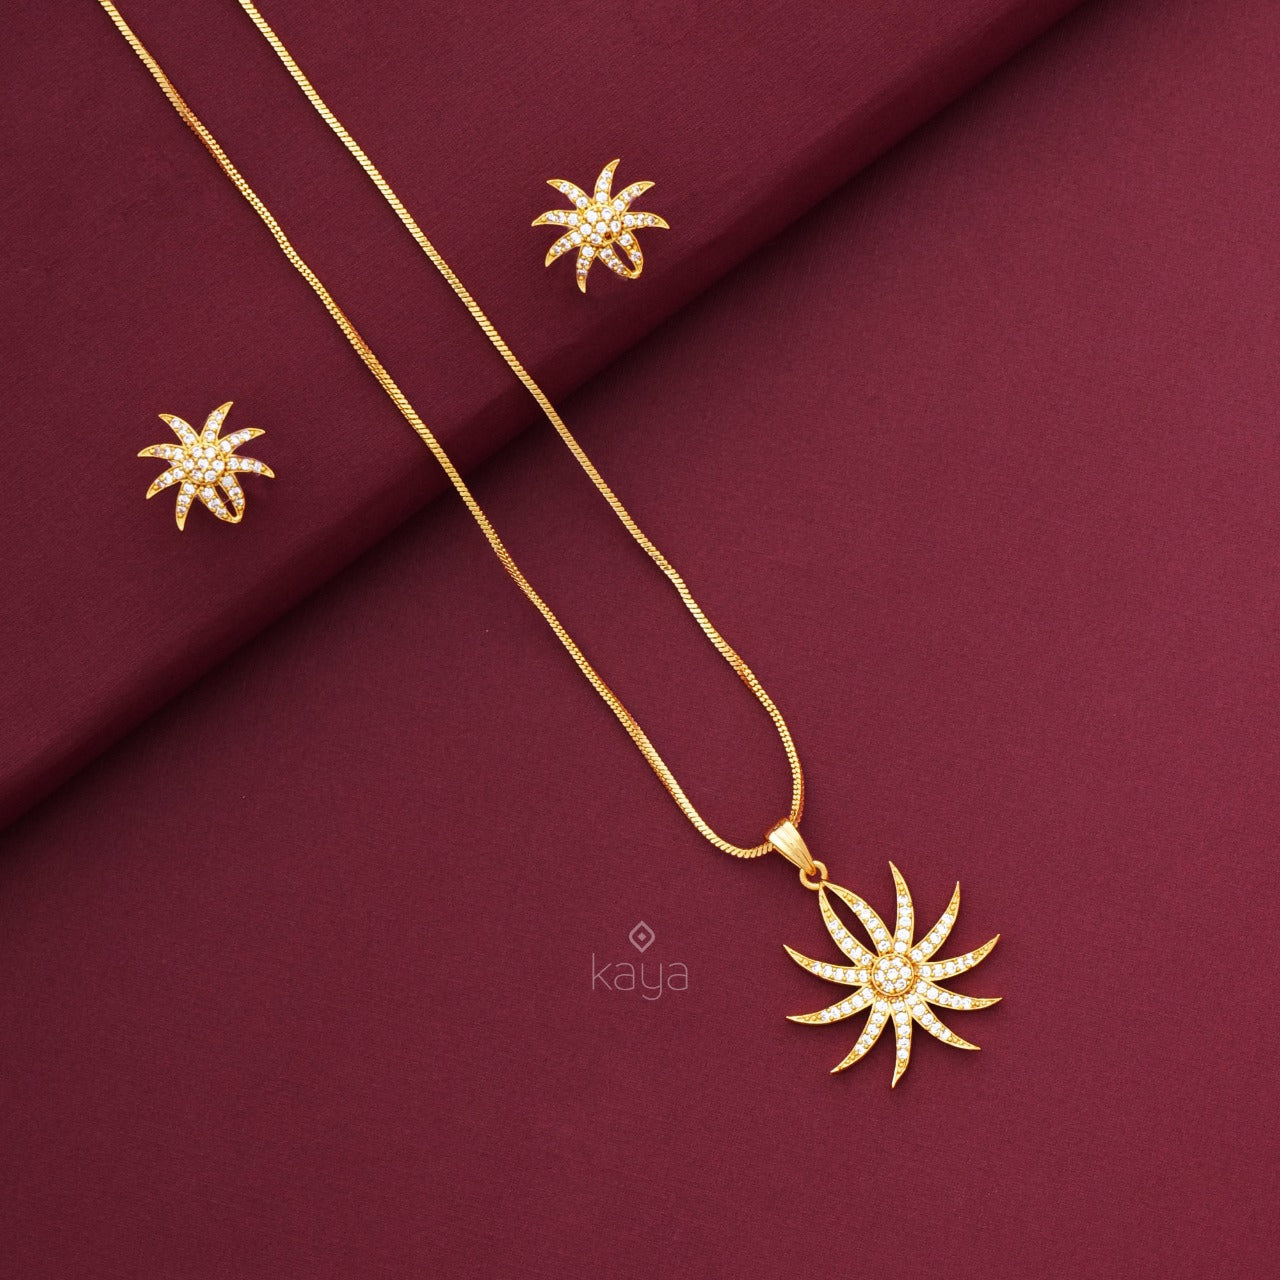 Simple pendant Necklace with Matching Earrings - PE100157